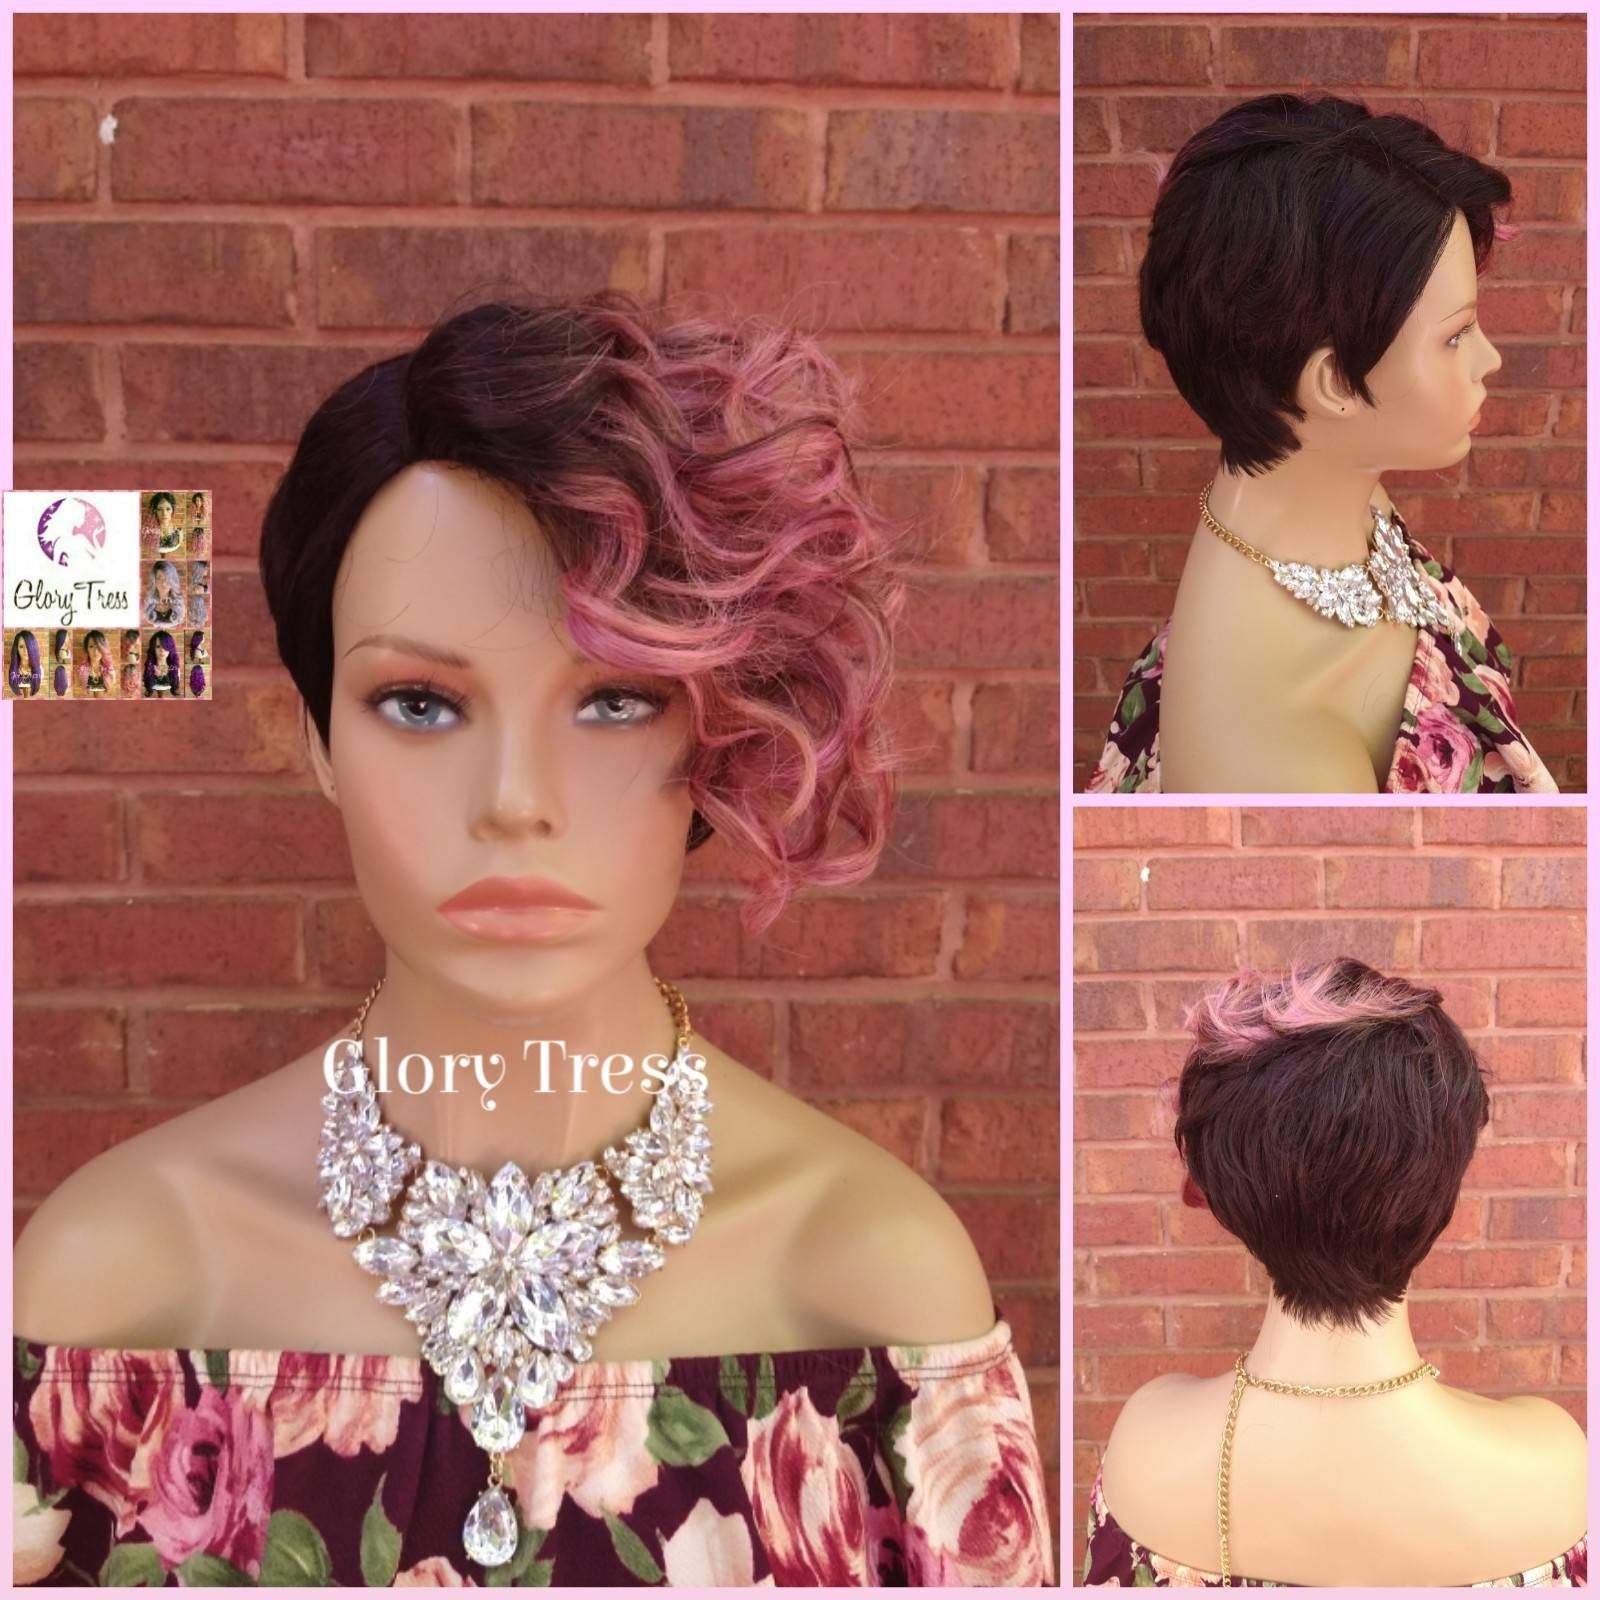 Short Razor Cut Full Wig, Pixie Cut Hairstyle With Long Side Bangs, Ombre Pink Wig, Glory Tress, Lace Side Part //REVIVE